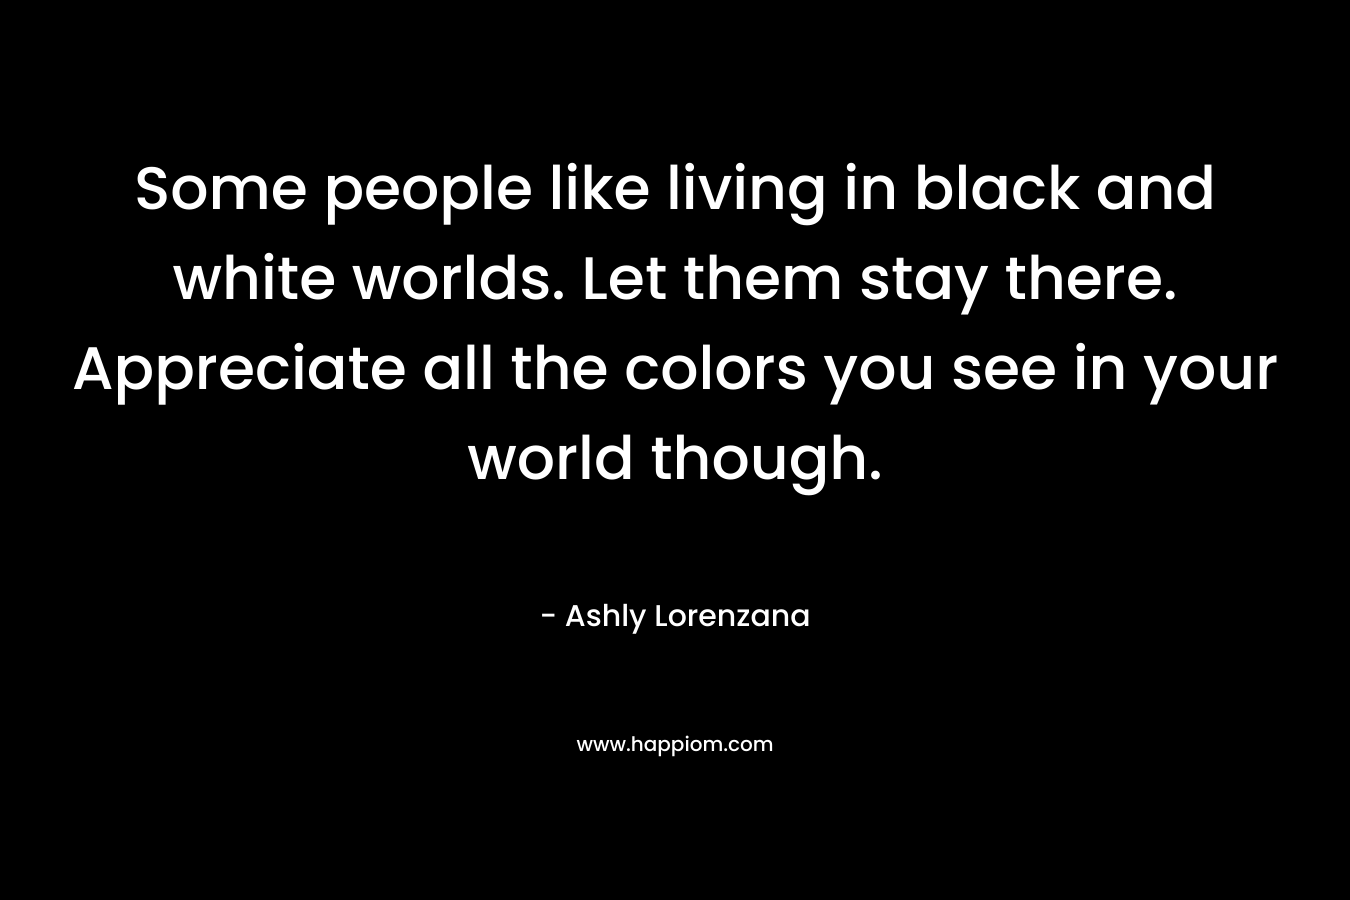 Some people like living in black and white worlds. Let them stay there. Appreciate all the colors you see in your world though. – Ashly Lorenzana